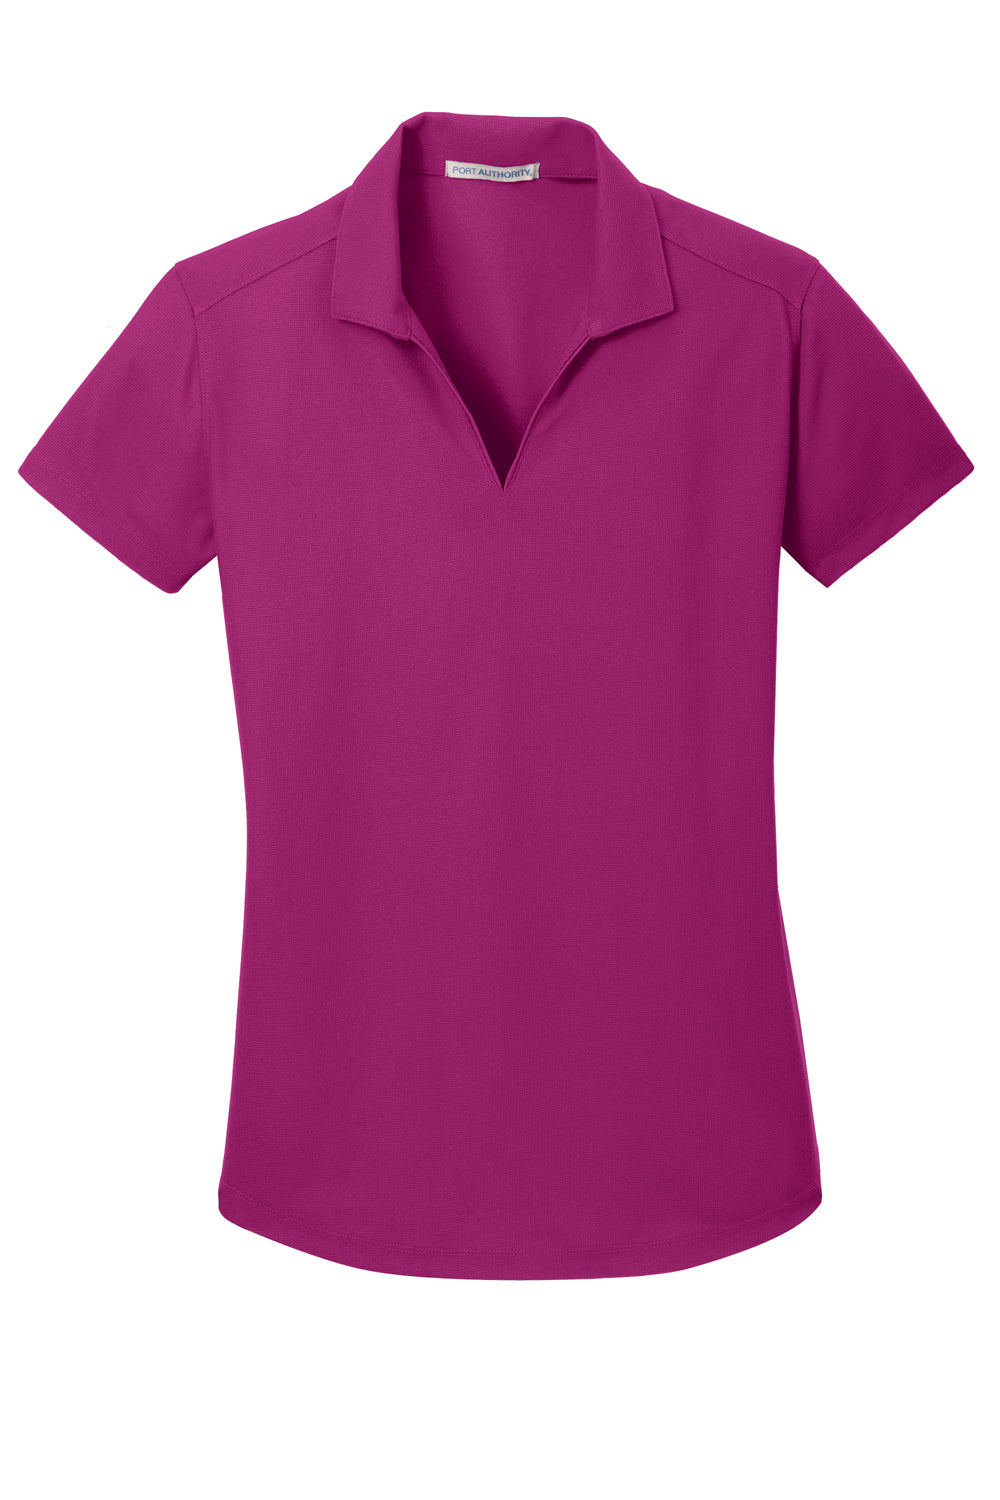 Port Authority L572 Womens Dry Zone Moisture Wicking Short Sleeve Polo Shirt Magenta Purple Flat Front